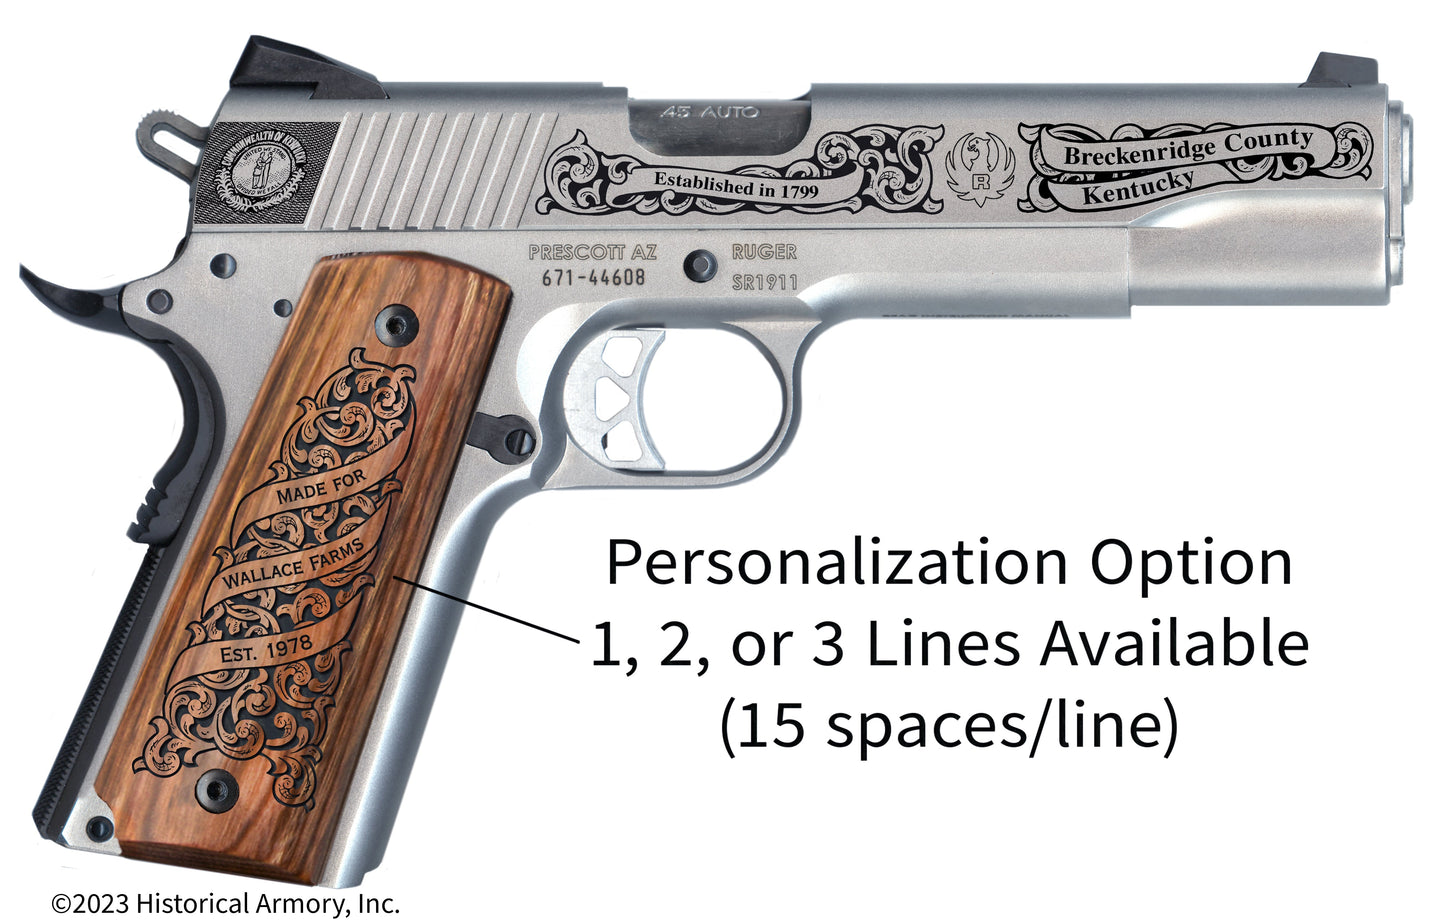 Breckinridge County Kentucky Personalized Engraved .45 Auto Ruger 1911